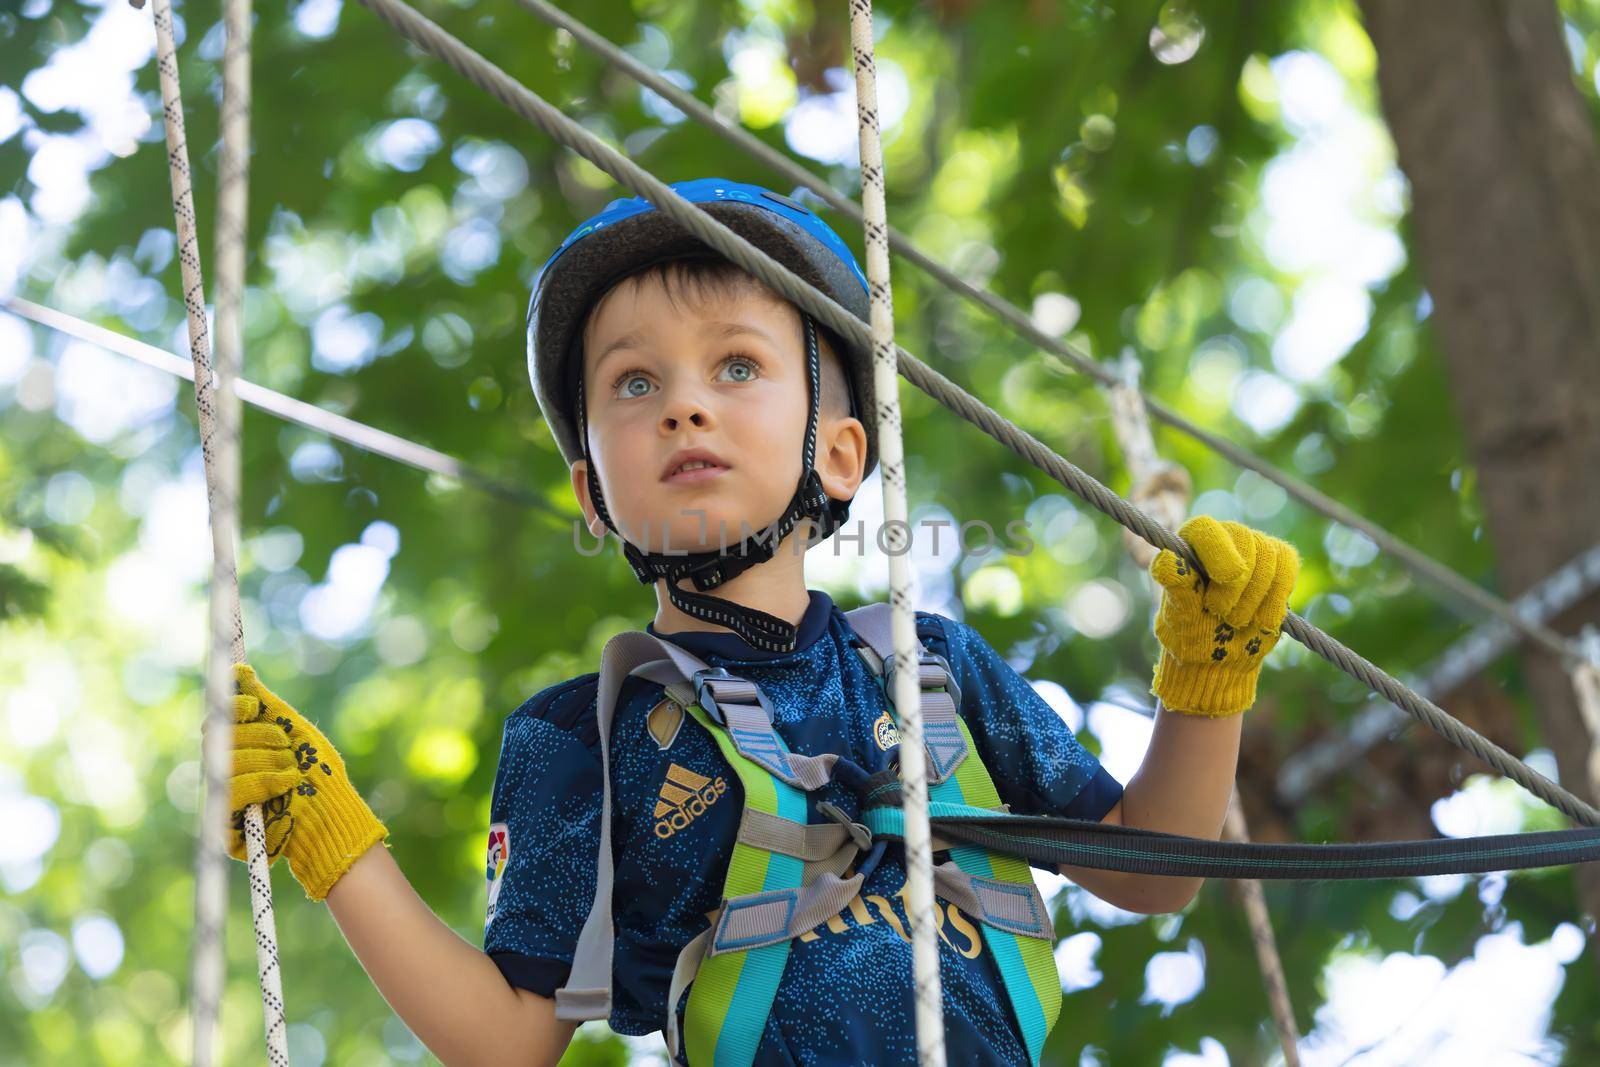 UZHHOROD, UKRAINE - Jul 23, 2020: Extreme sport in adventure park. Young boy passing the cable route high among trees